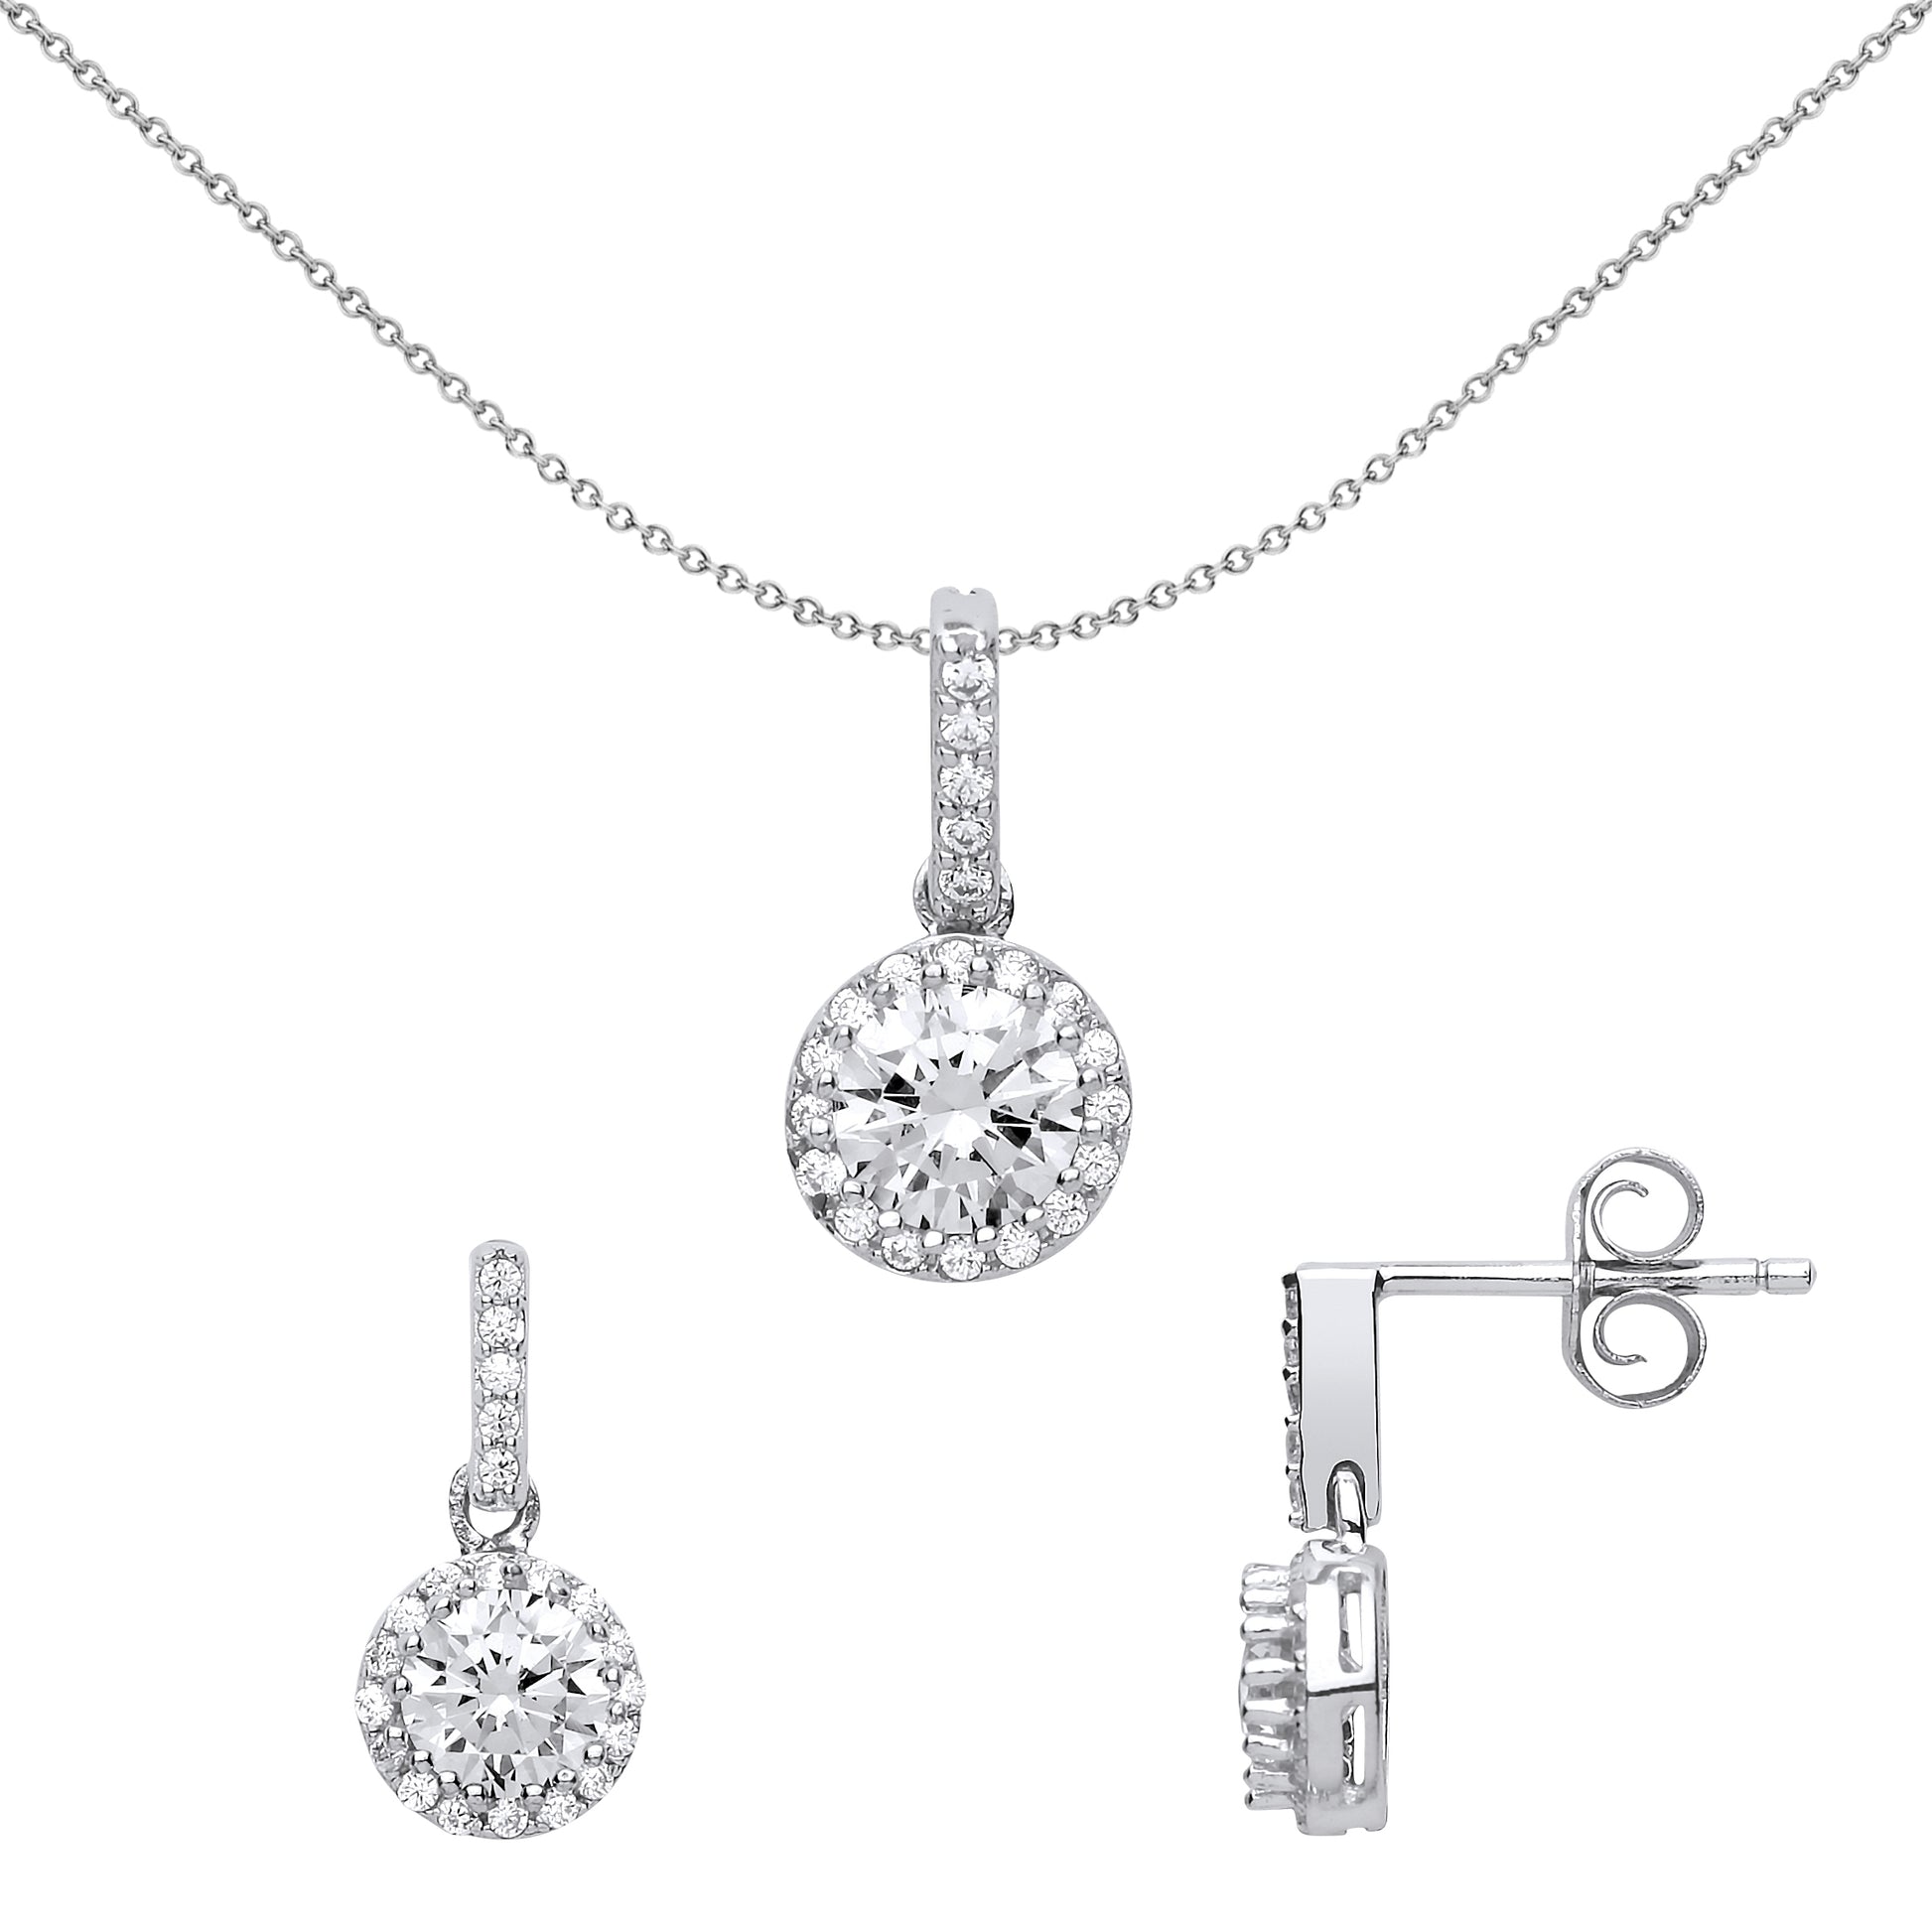 Silver  CZ Halo Earrings Necklace Set - GSET608